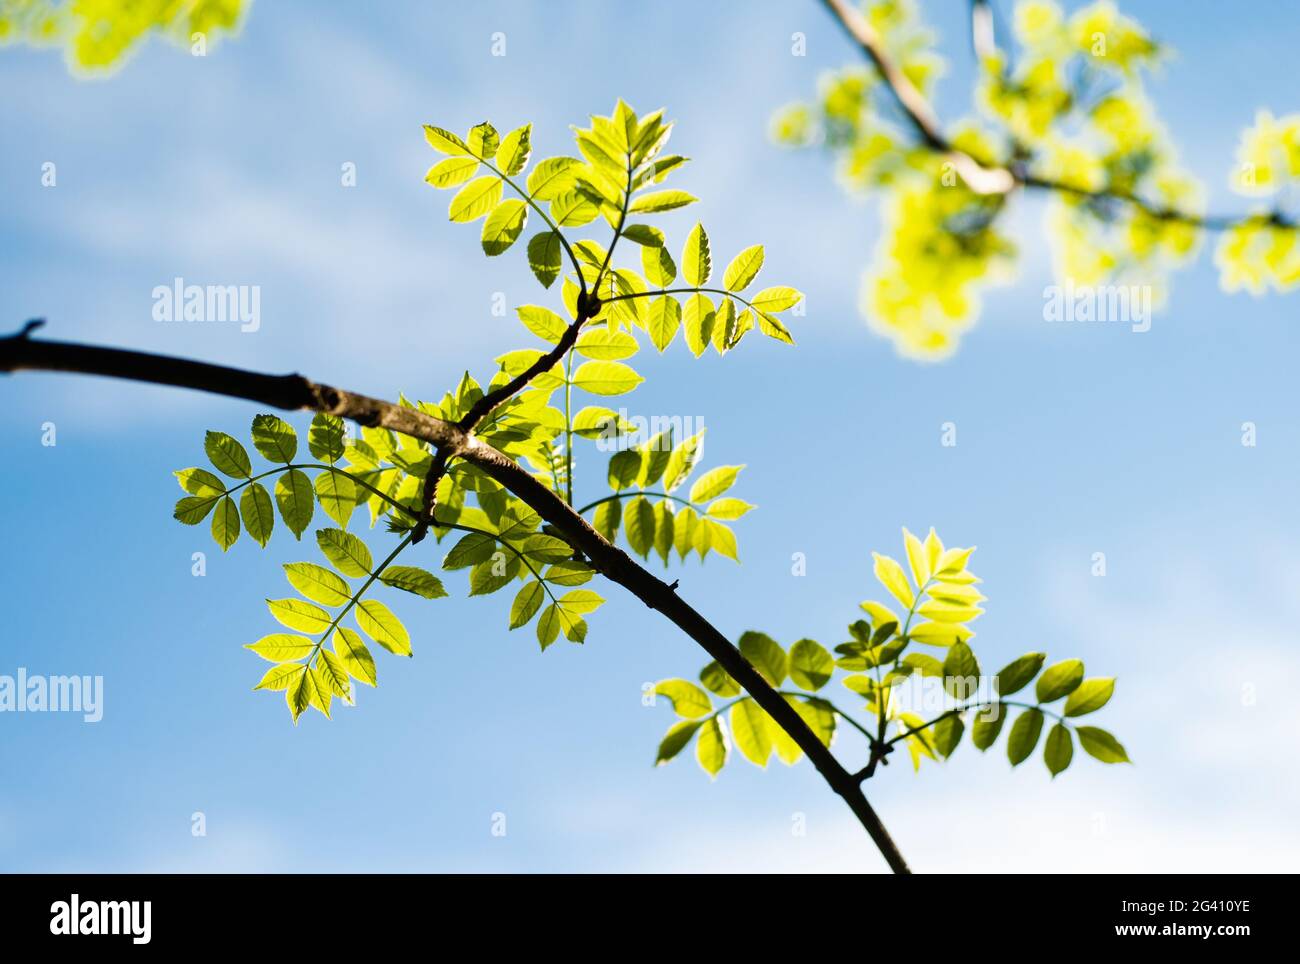 Twig with Lush Green Beech Tree Leaves in Spring Isolated on Blue Sky in the Sun in Selective Focus Stock Photo